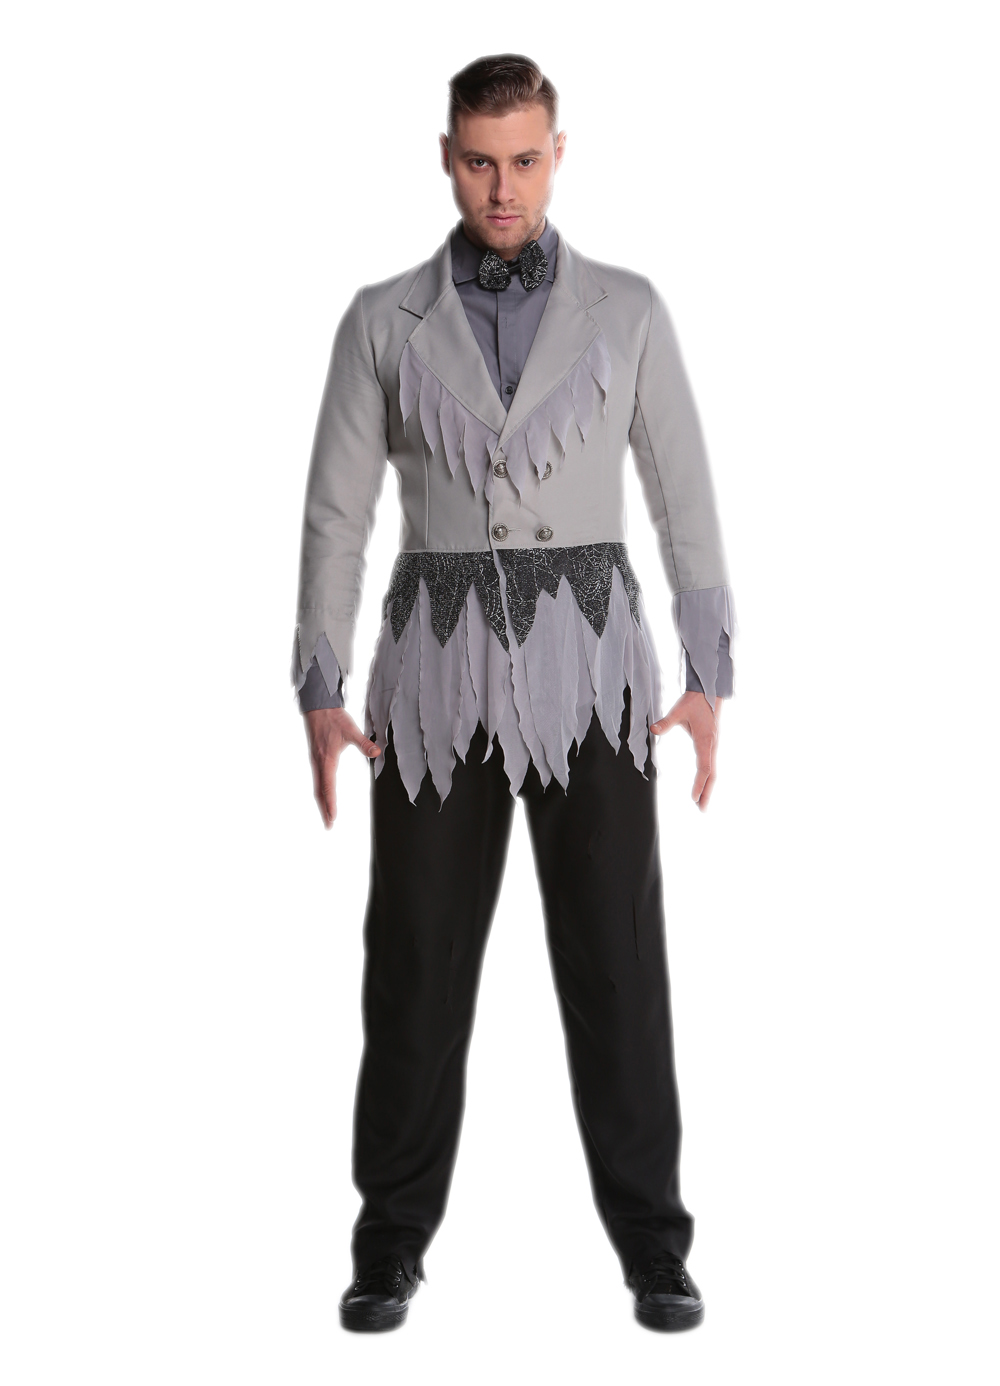 F1733 Halloween Infected Man Costume,it comes with coat,tshirt,tie,panty